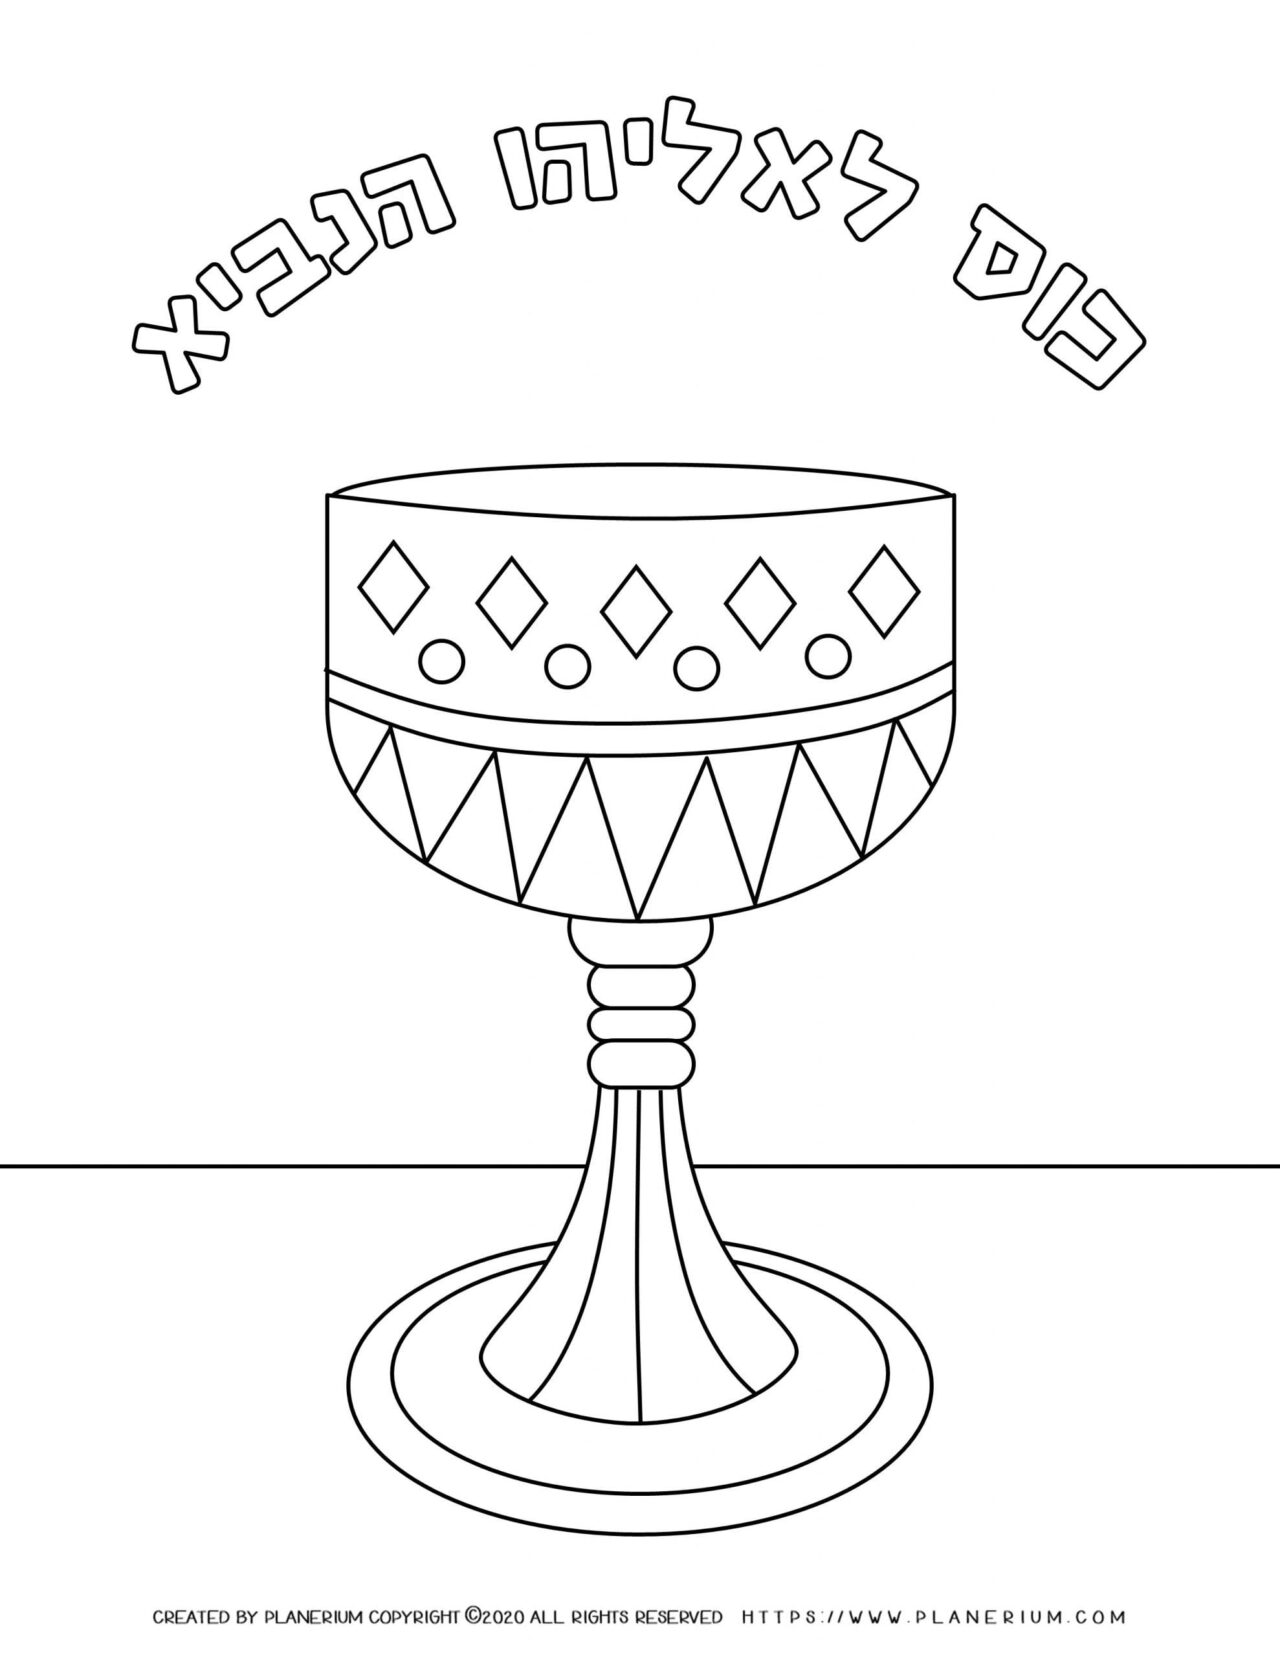 Passover coloring page - Elijah cup with Hebrew title